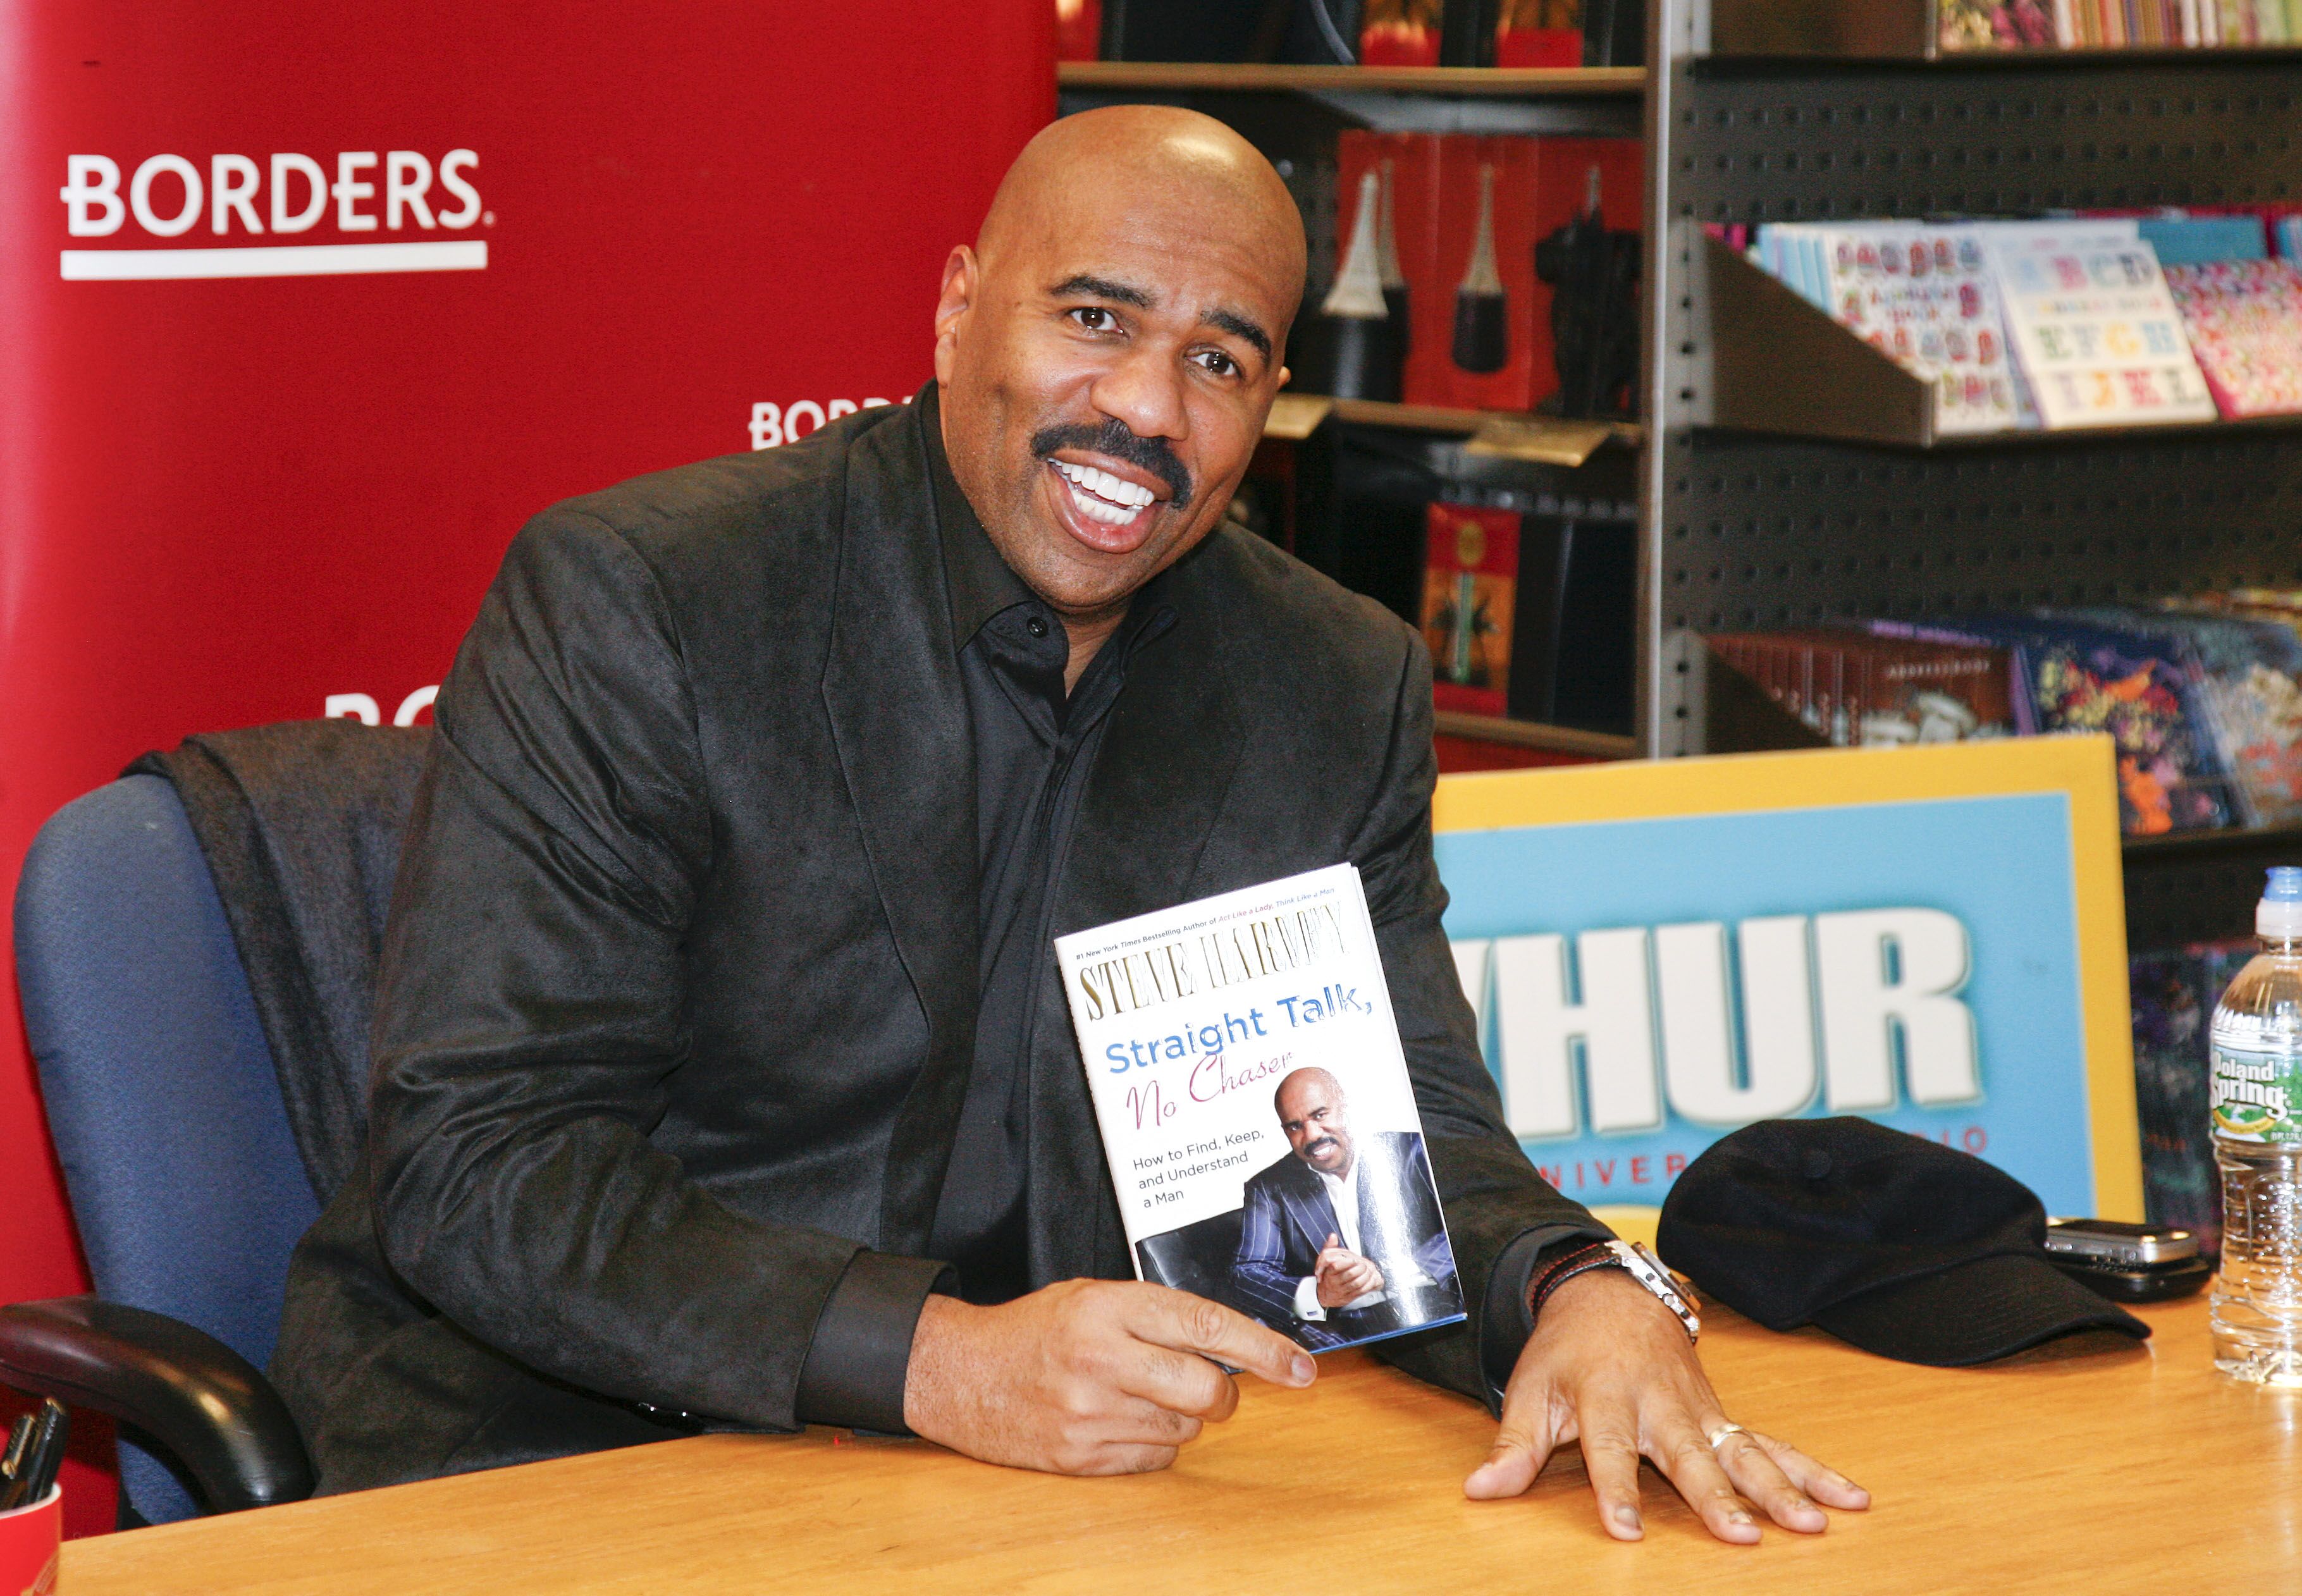 Steve Harvey at a book signing for "Straight Talk, No Chaser" in 2011 in Washington, DC.| Source: Getty Images